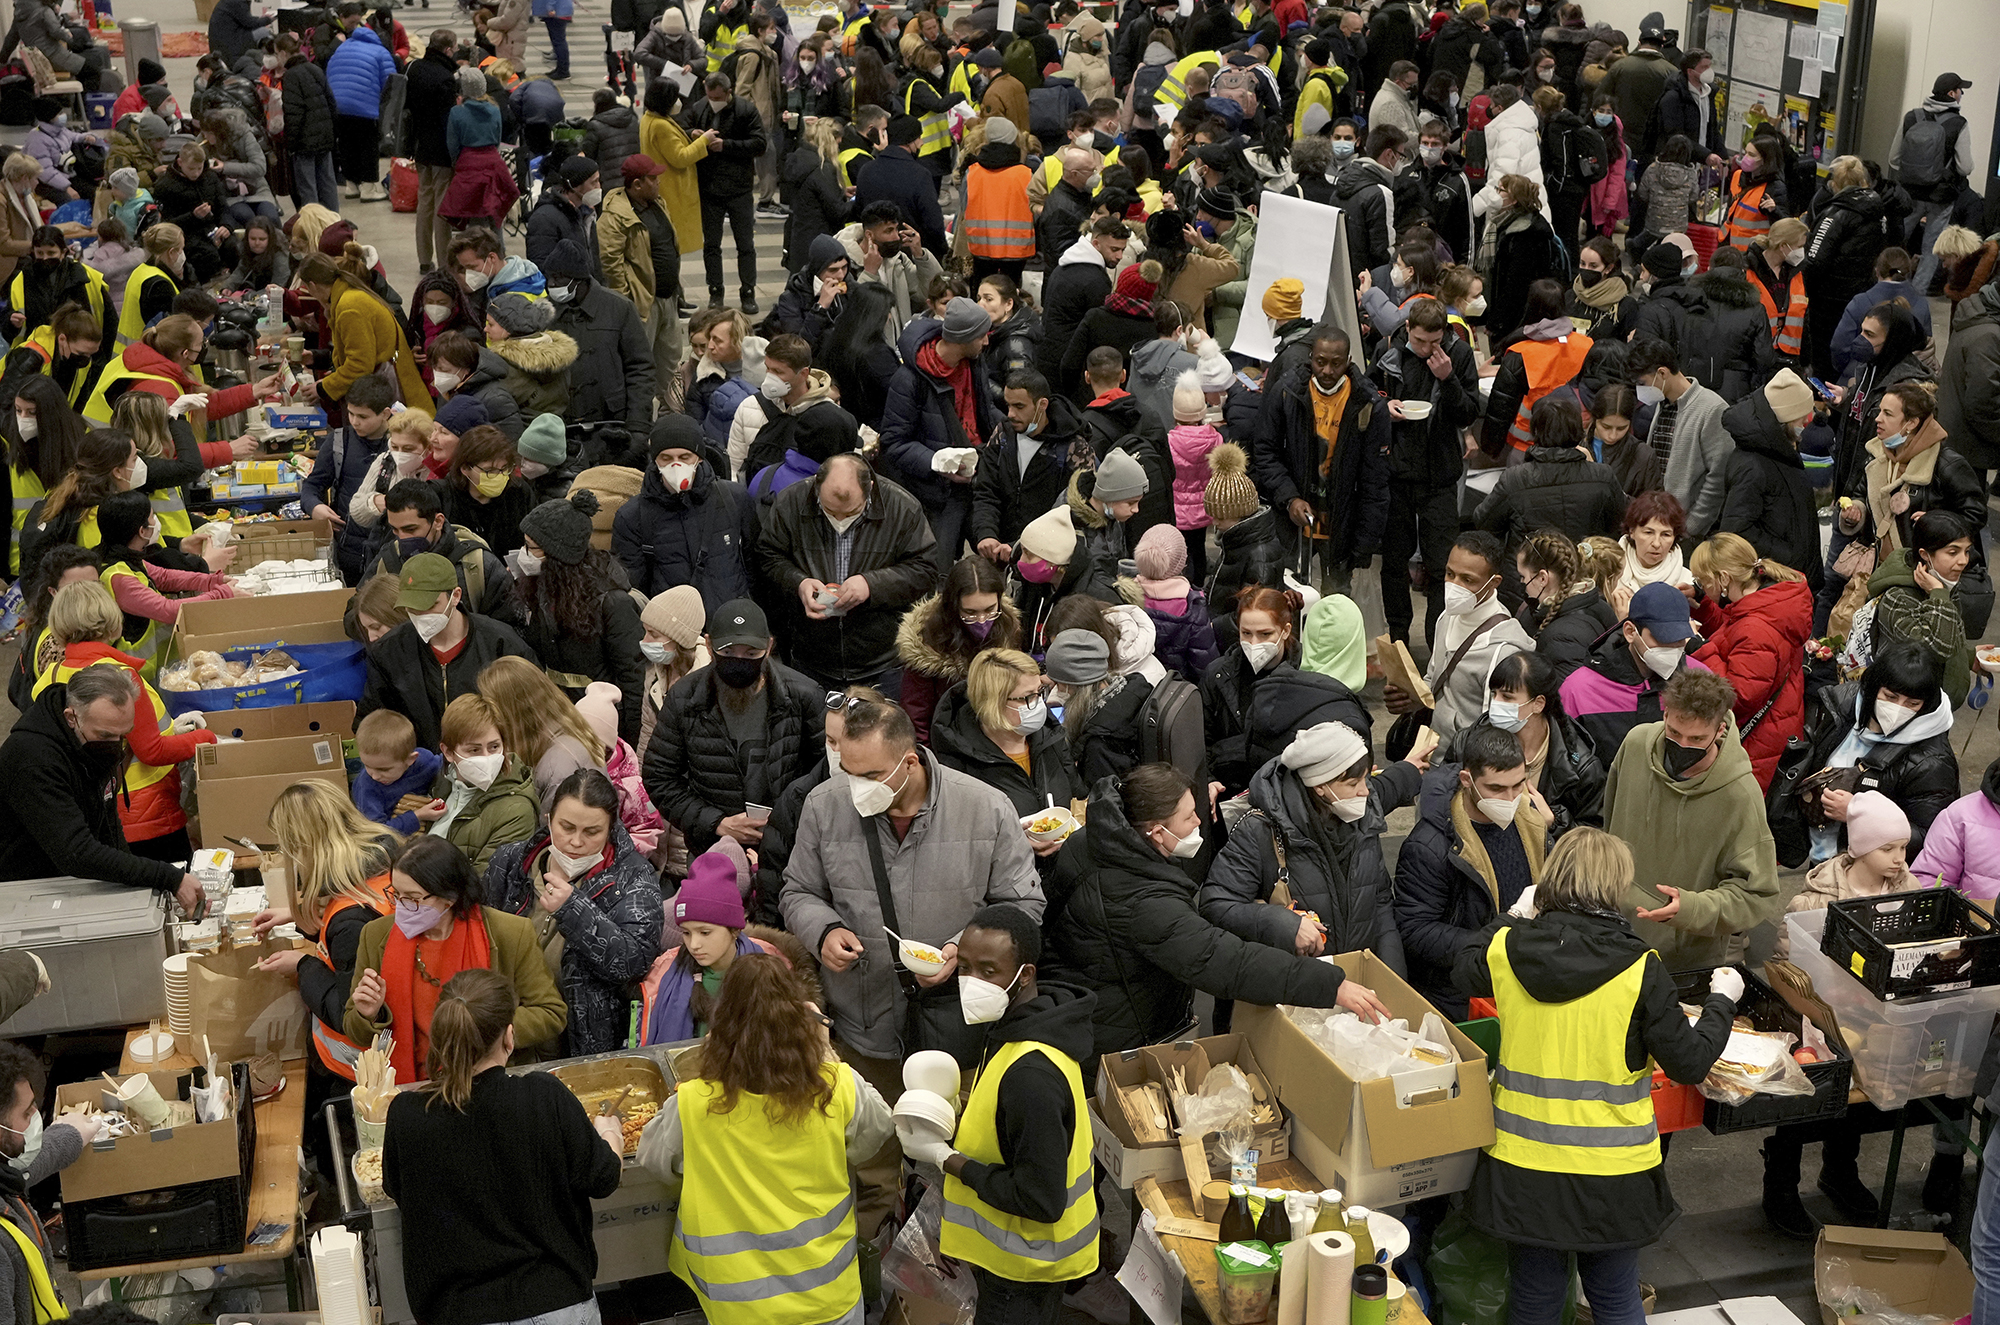 Ukrainian refugees queue for food in the welcome area after their arrival at the main train station in Berlin, Germany, on March 8.